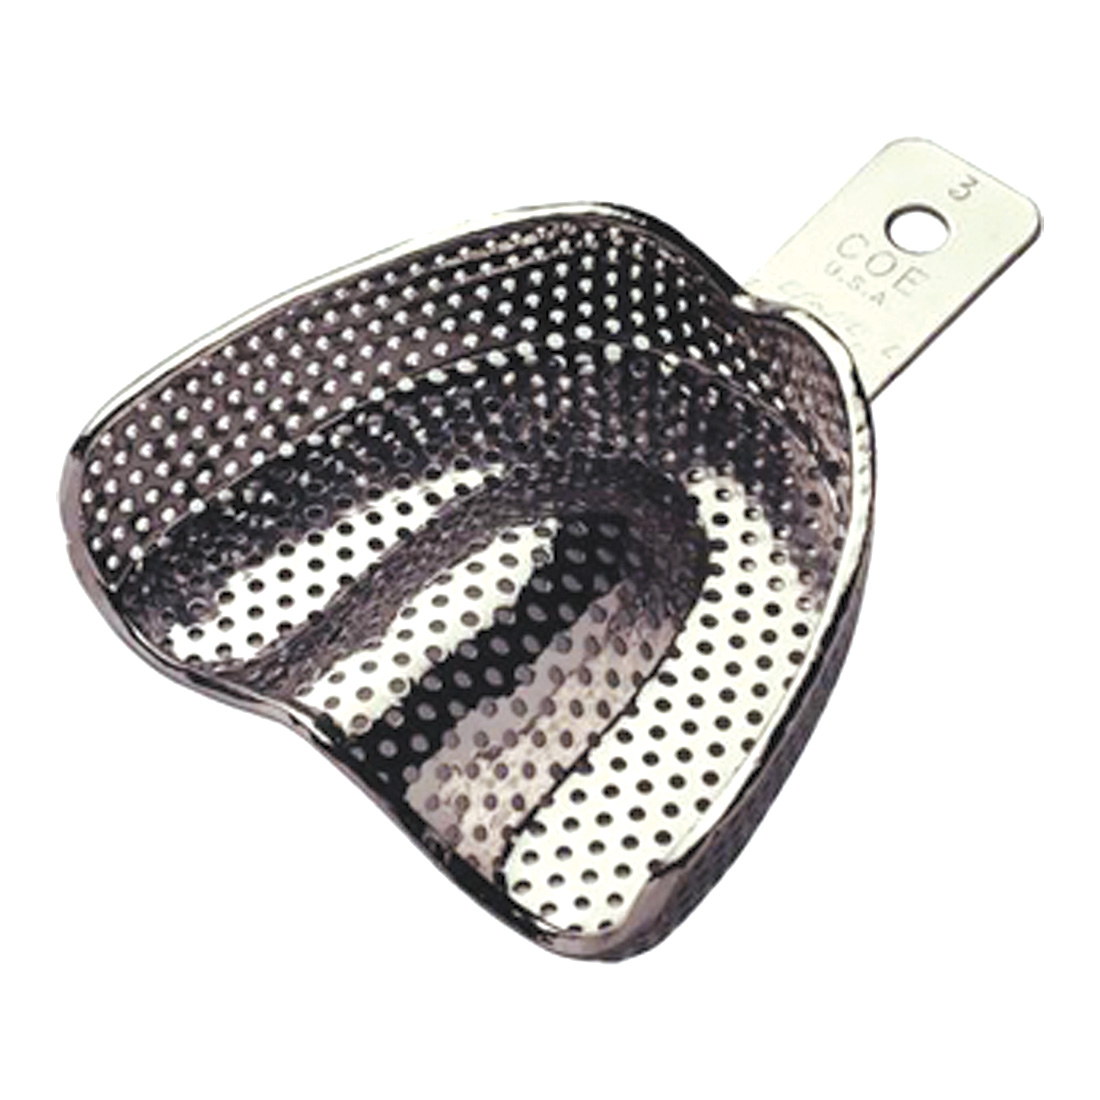 #3 Upper nickel plated regular perforated trays